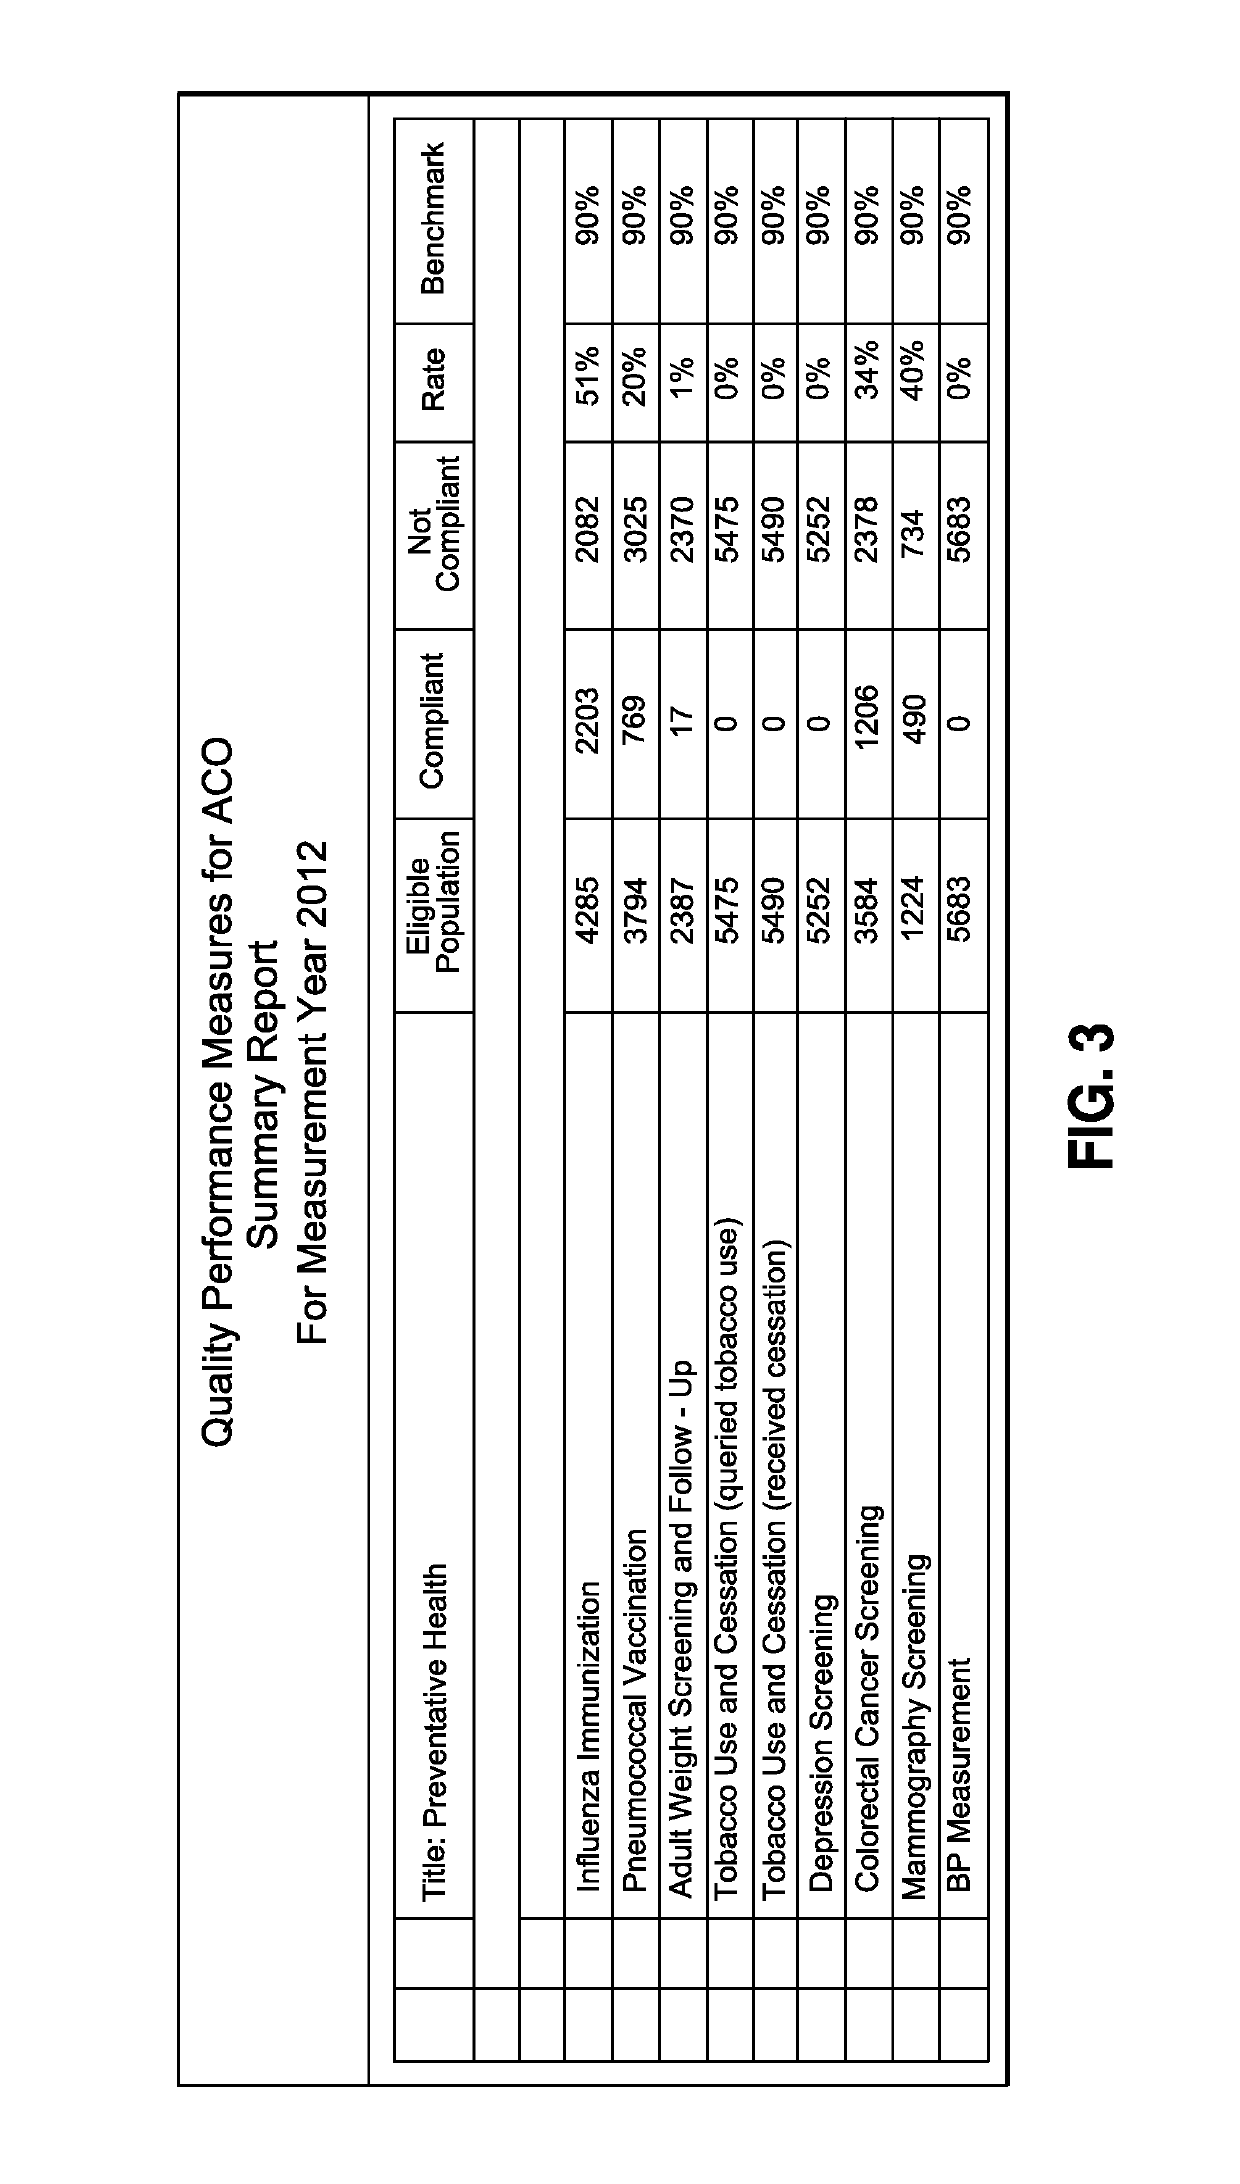 Methods for administering preventative healthcare to a patient population